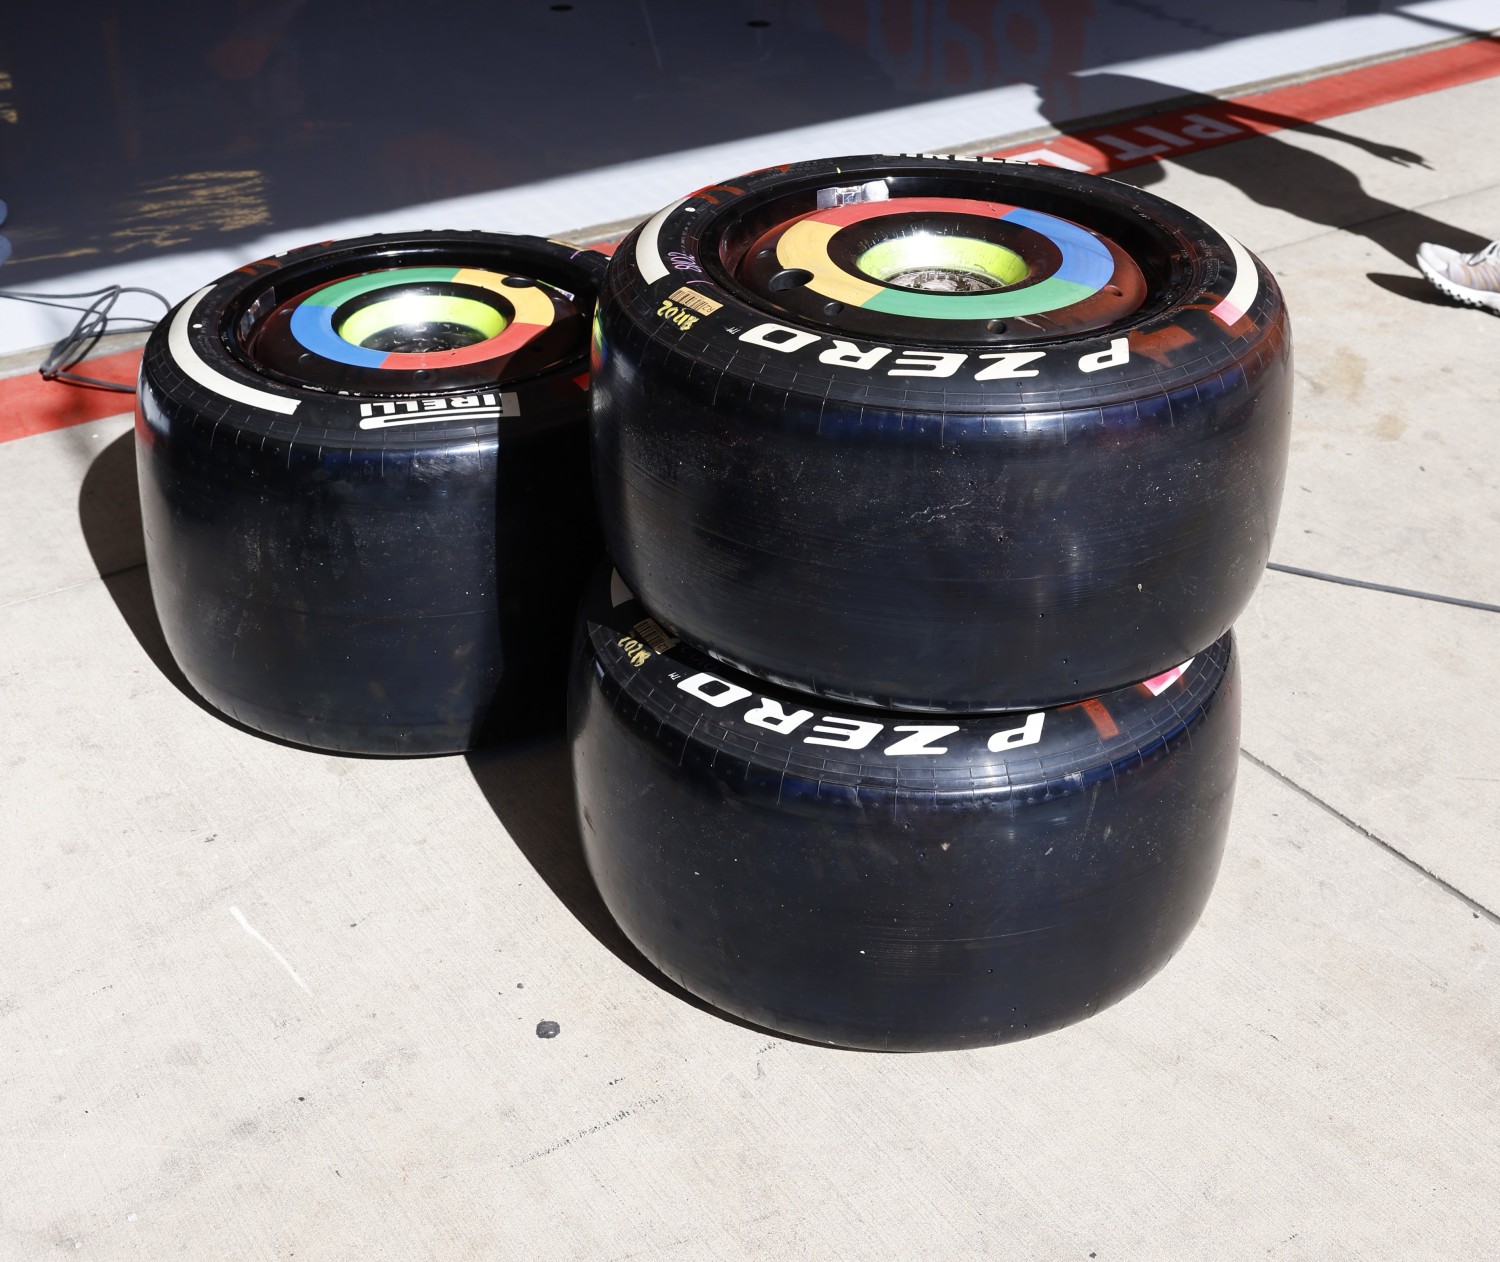 CIRCUIT OF THE AMERICAS, UNITED STATES OF AMERICA - OCTOBER 19: A stack of Pirelli P Zerohard tyres during the United States GP at Circuit of the Americas on Thursday October 19, 2023 in Austin, United States of America. (Photo by Steven Tee / LAT Images)